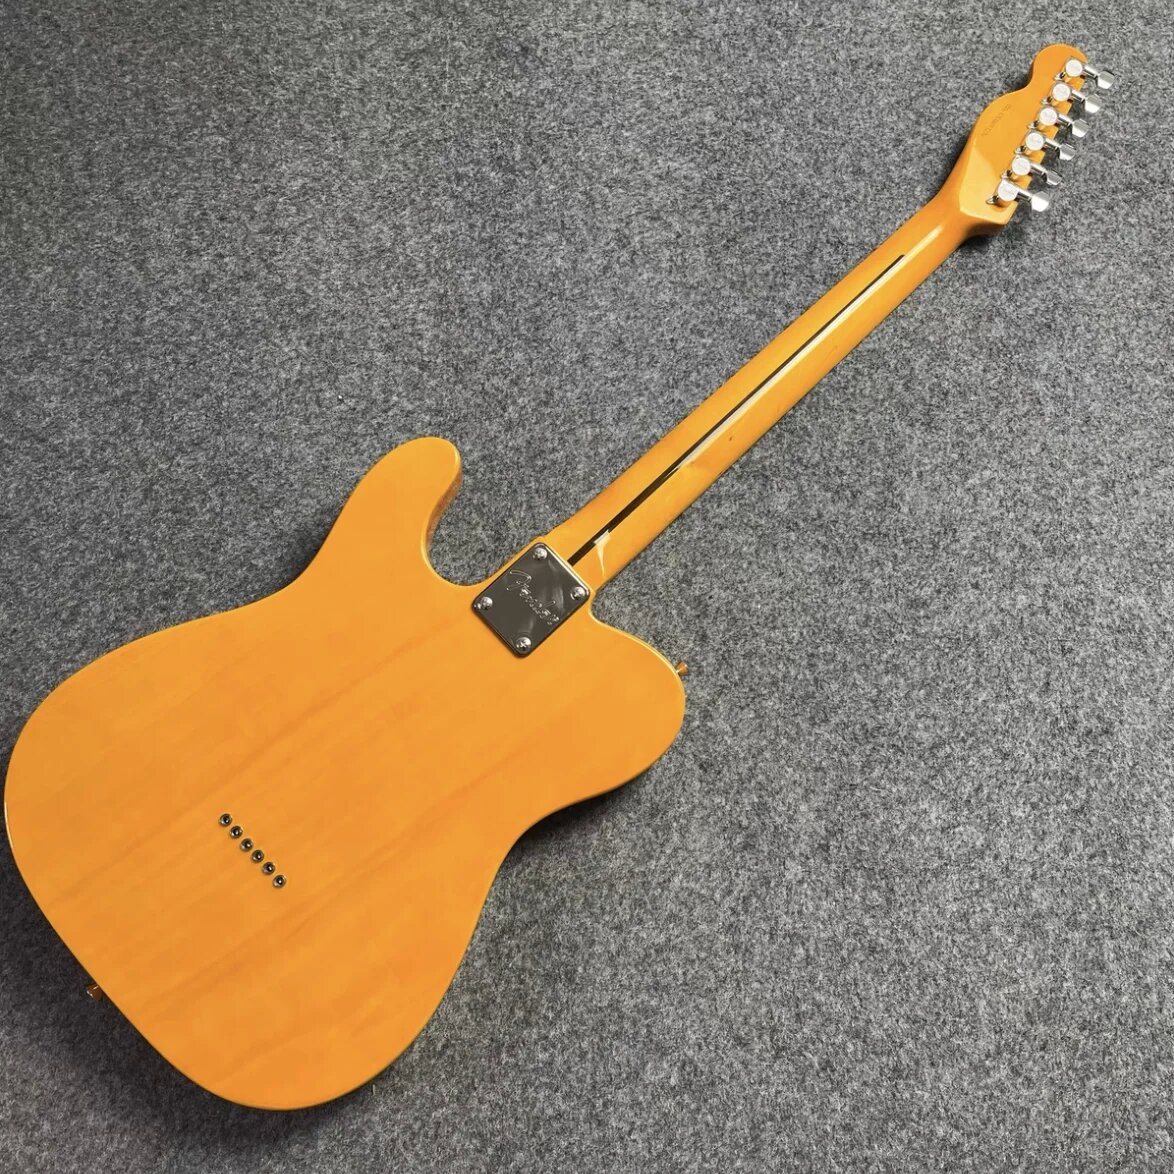 Inheriting the classic light yellow transparent yellow electric guitar can be customized 